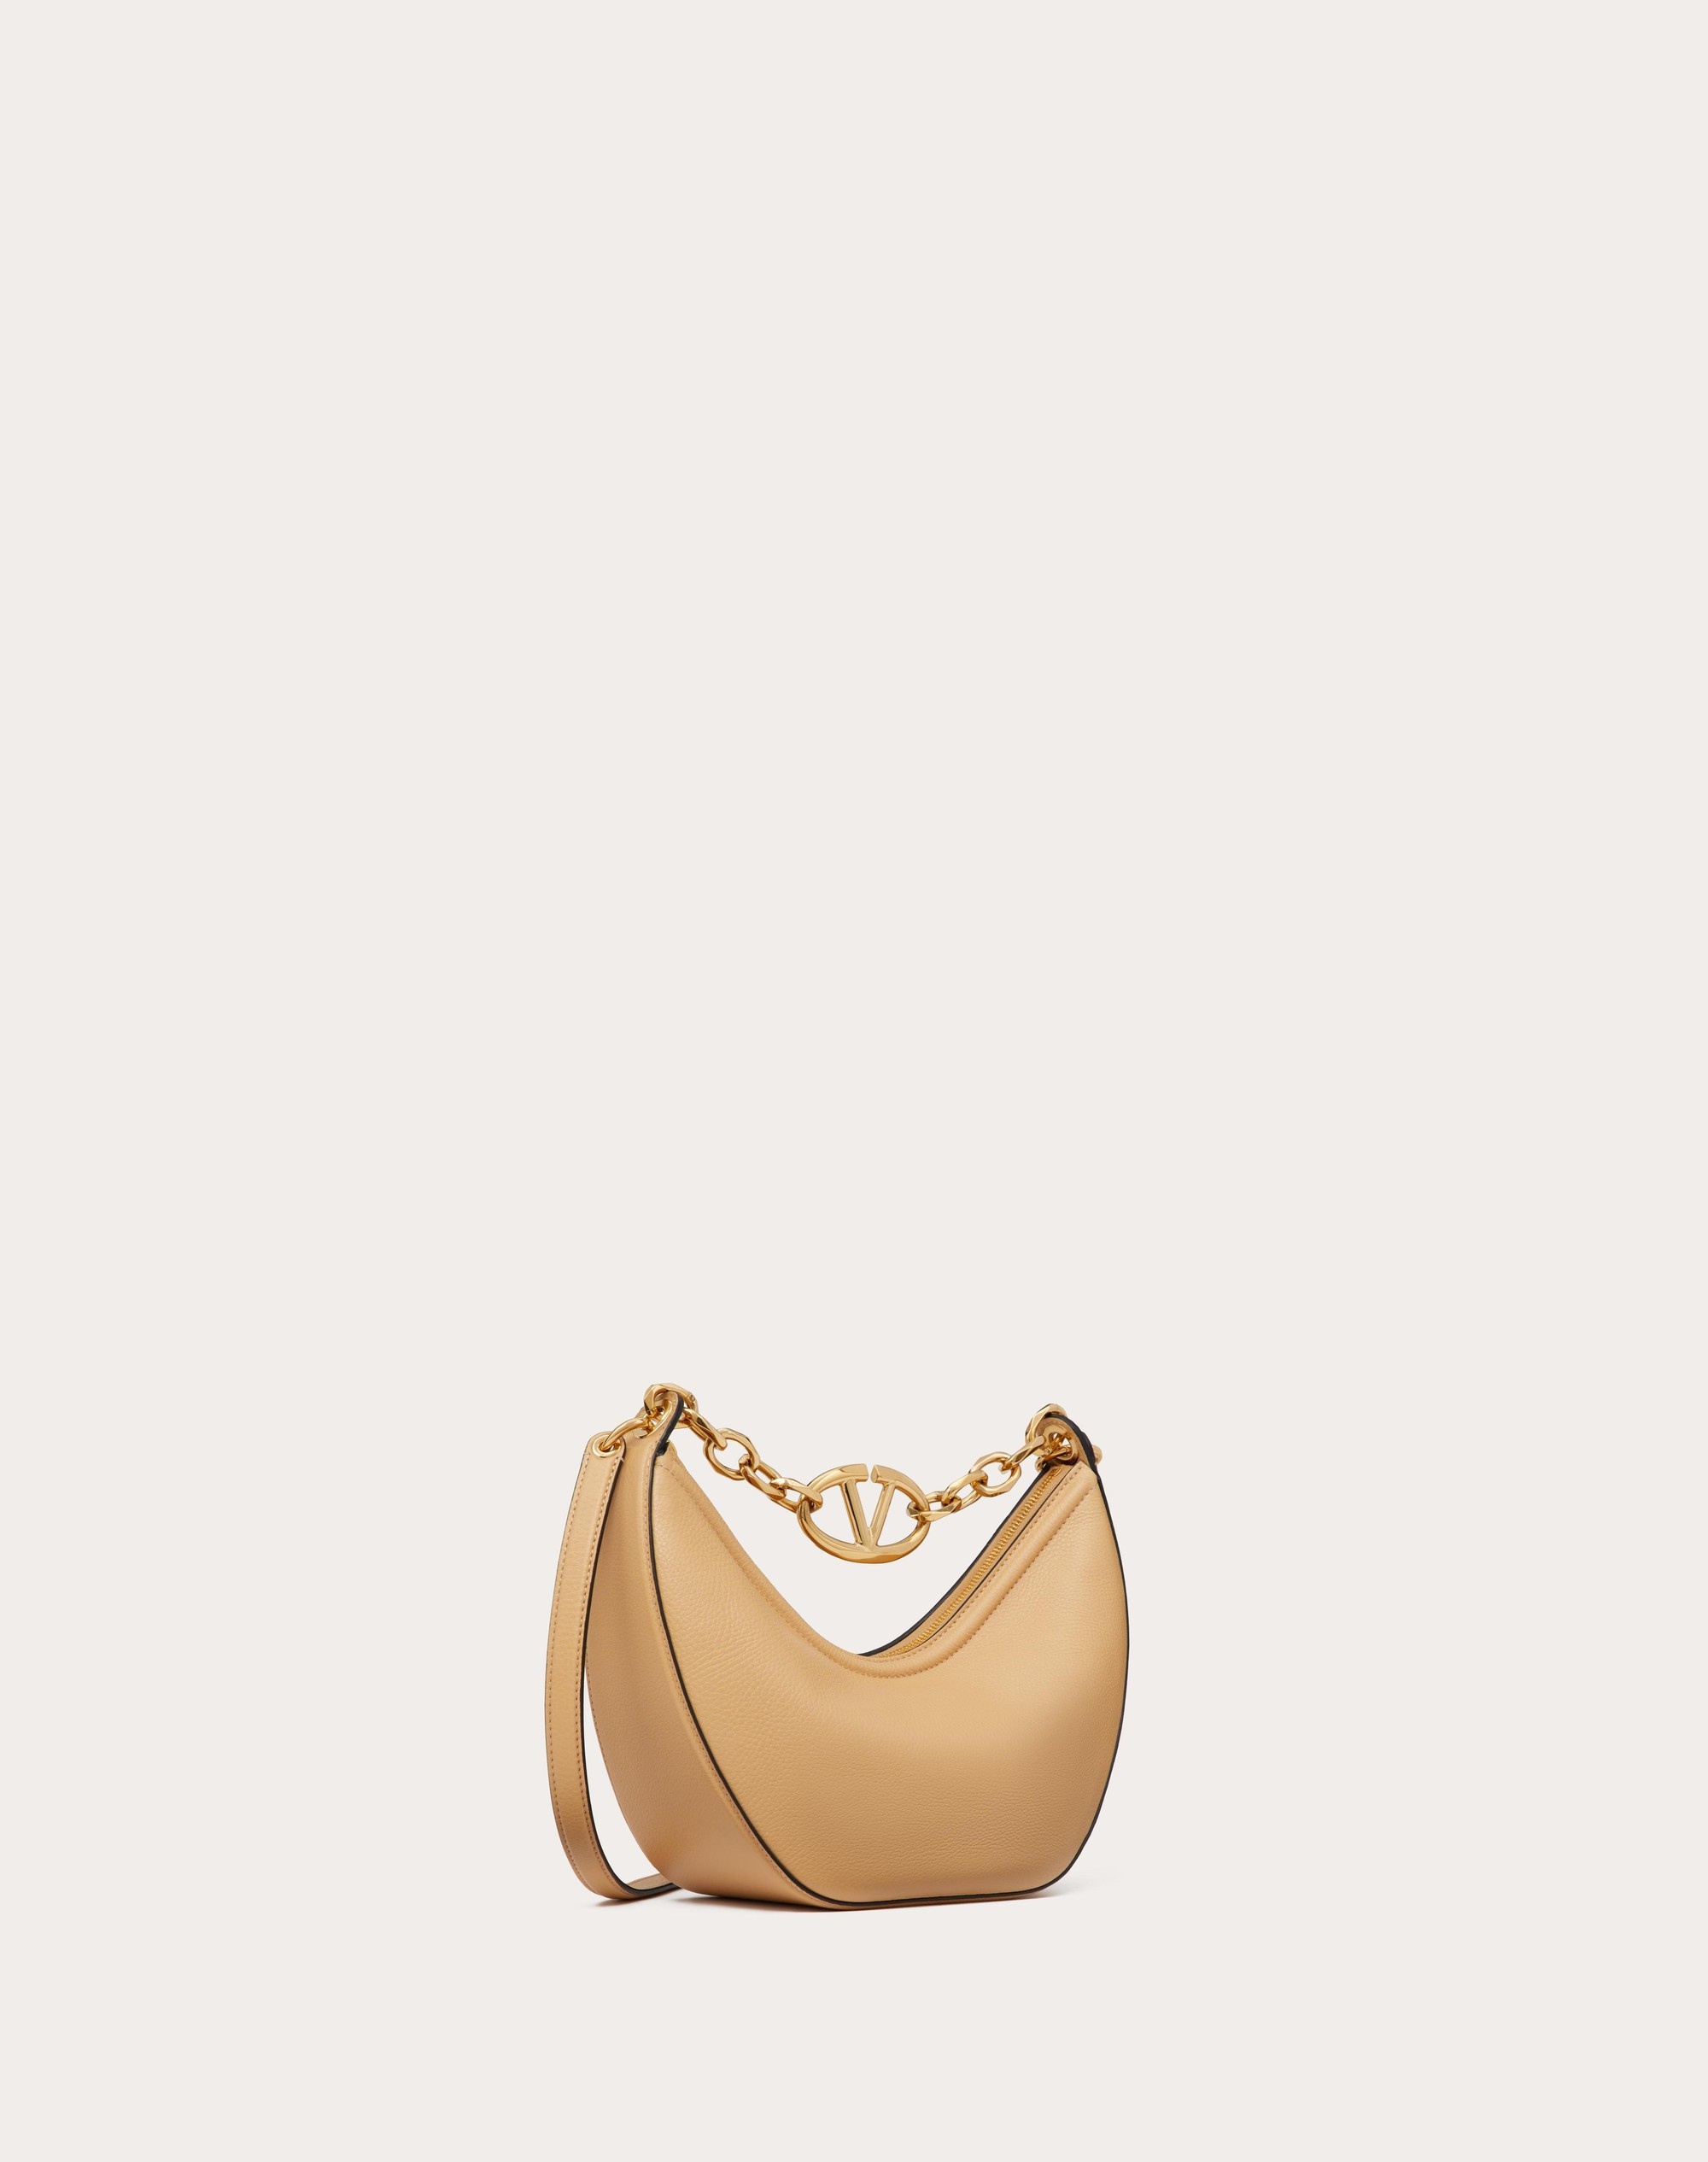 SMALL VLOGO MOON HOBO BAG IN GRAINY CALFSKIN WITH CHAIN - 2